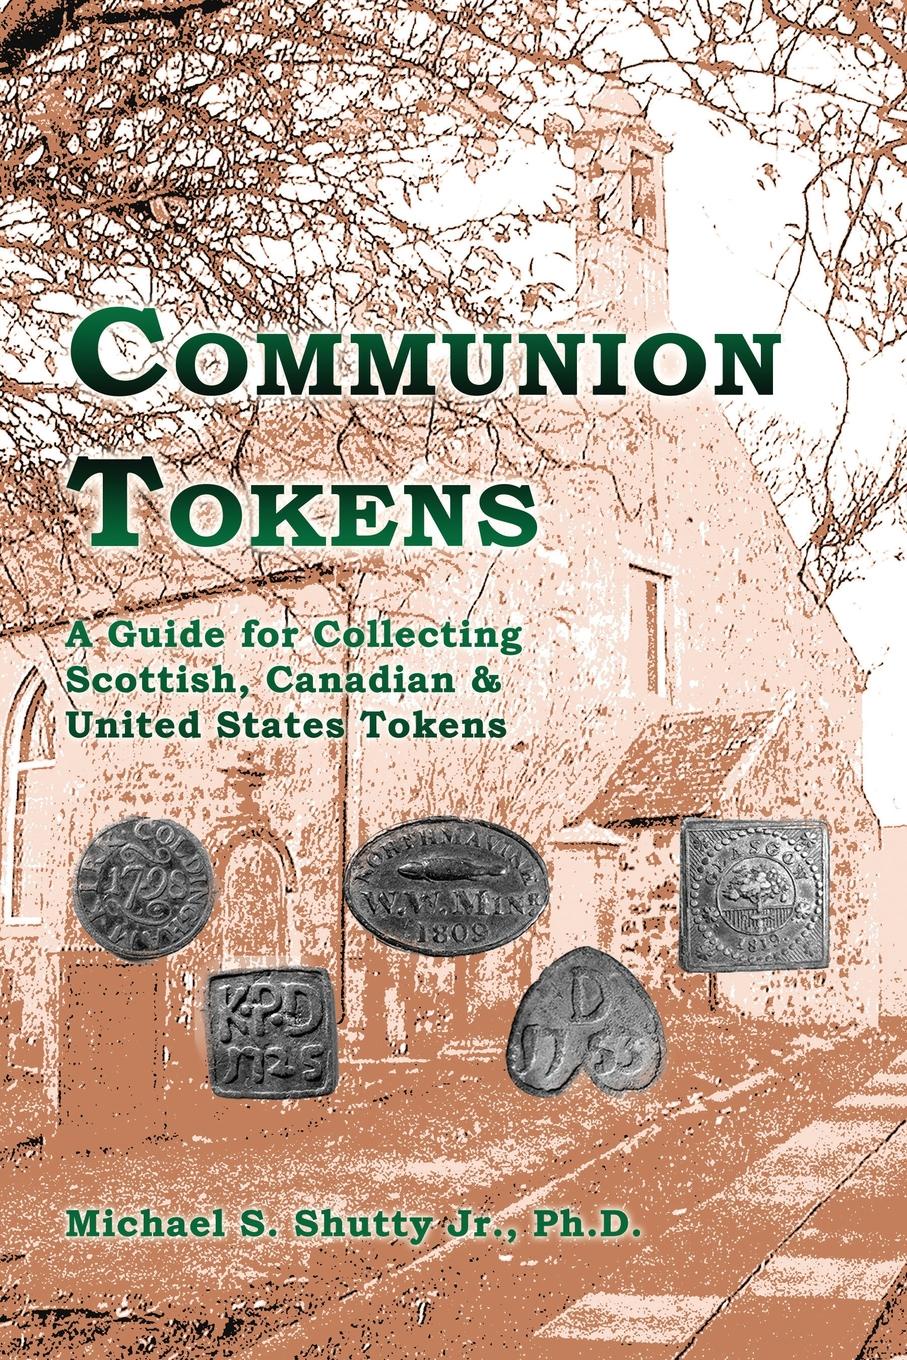 Communion Tokens. A Guide for Collecting Scottish, Canadian . United States Tokens